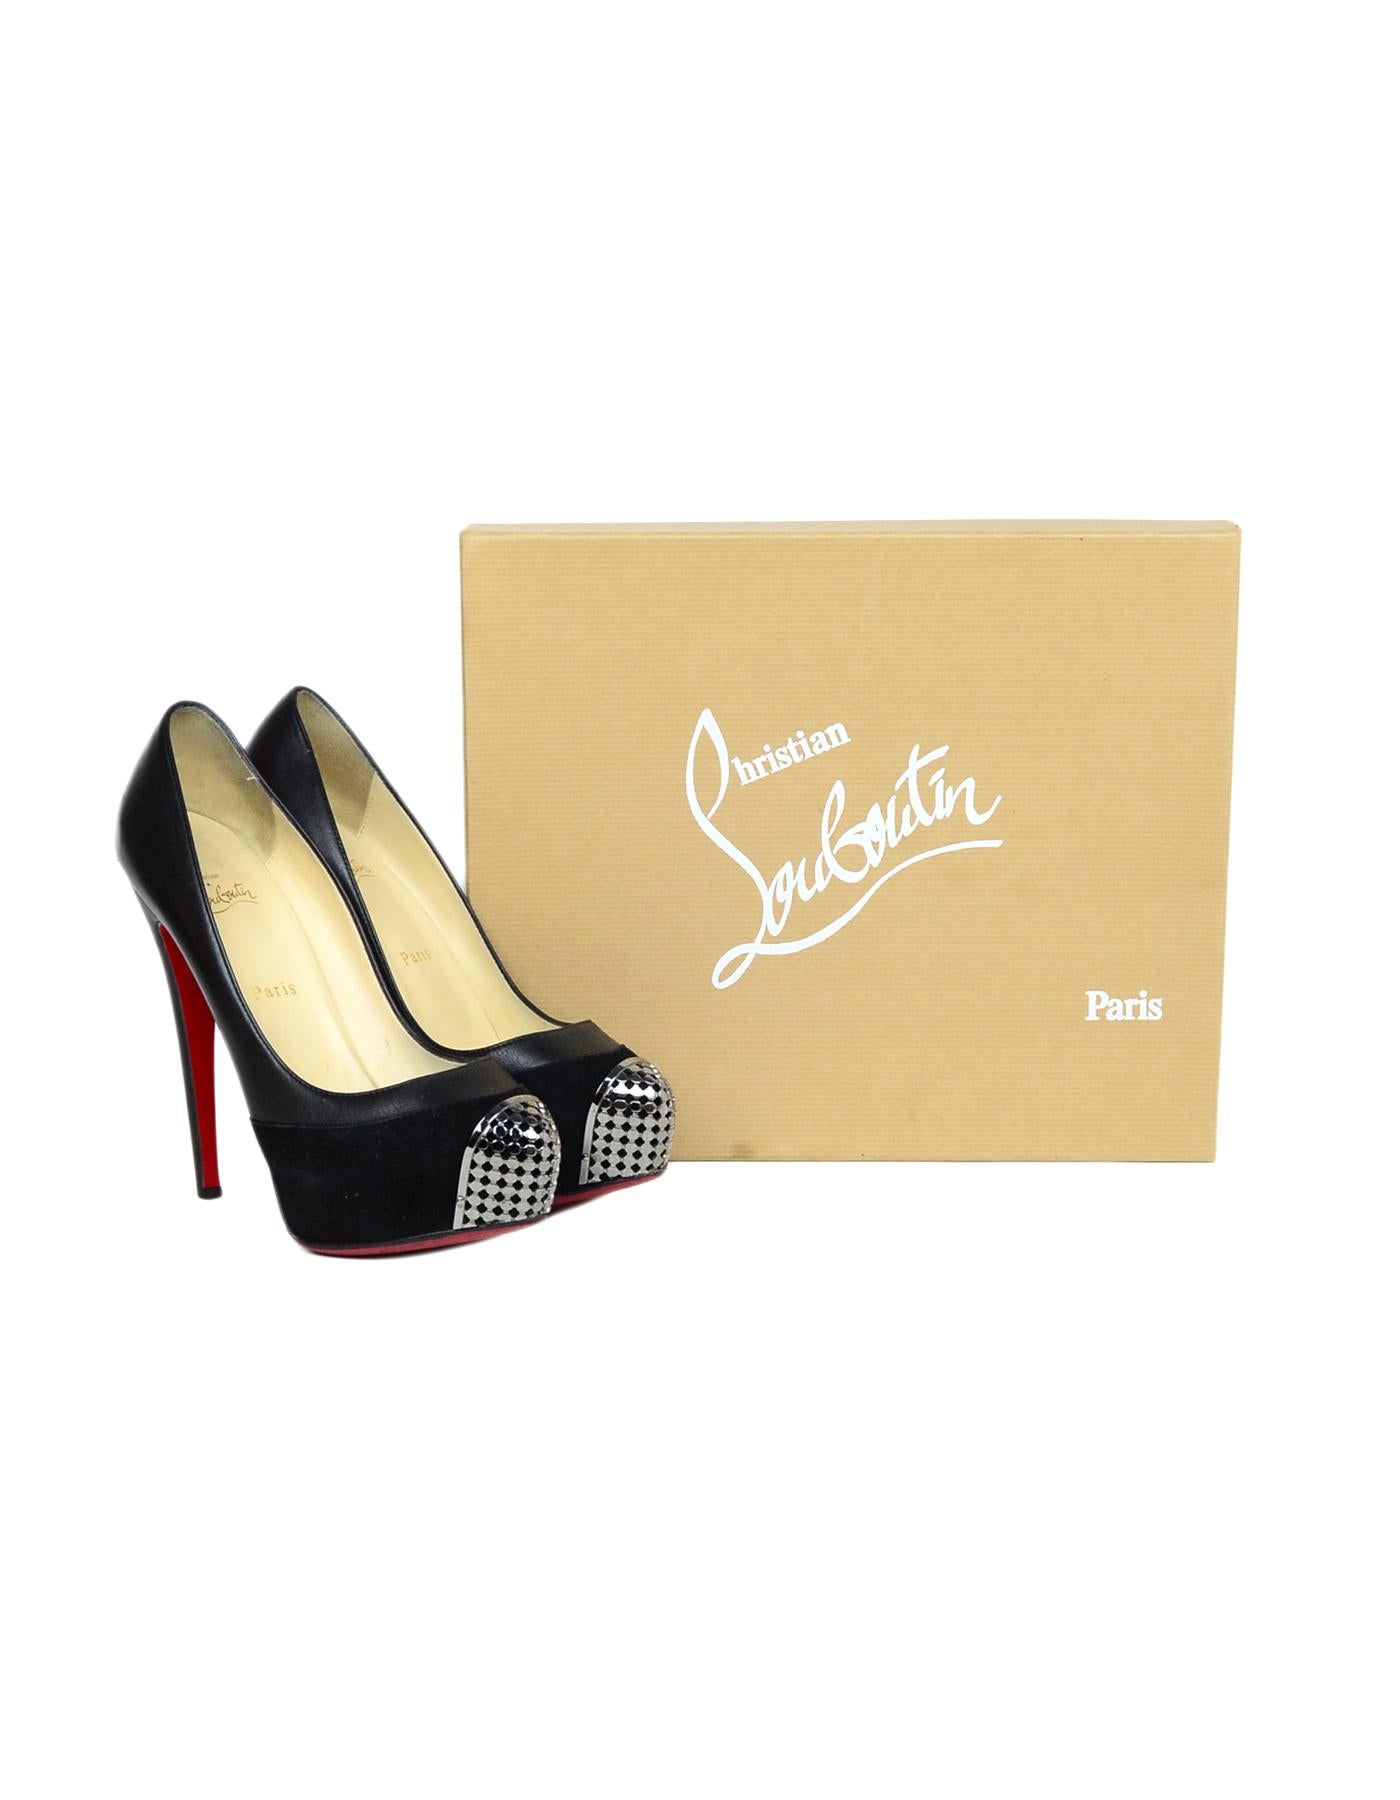 Christian Louboutin Black Leather/Suede Maggie 160 Pump VIP Chain Sz 38.5

Made In: Italy
Color: Black, silvertone
Hardware: Silvertone
Materials: Leather, suede, metal
Closure/Opening: Slide on
Overall Condition: Very good pre-owned condition with